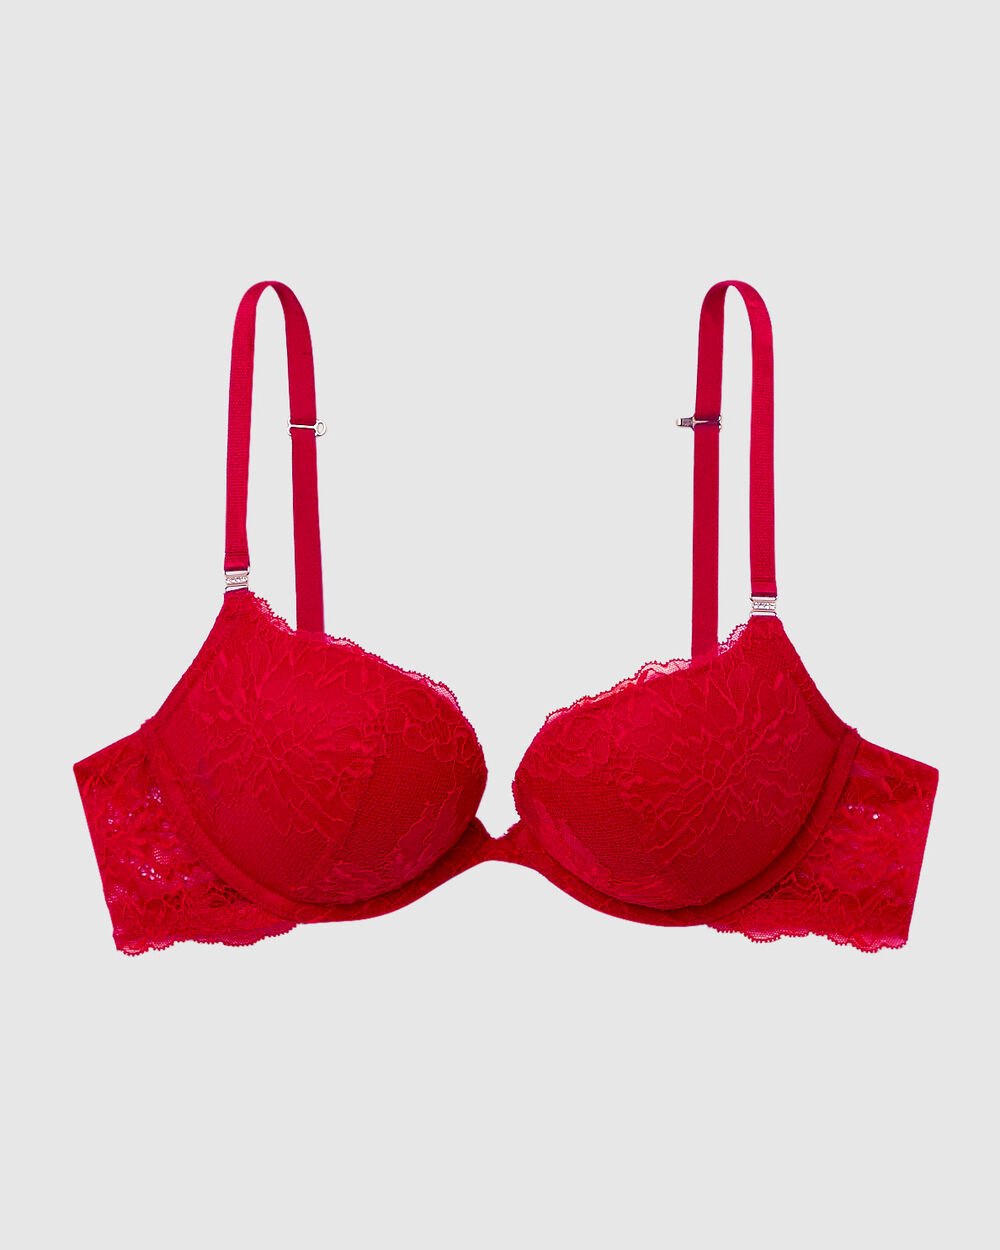 Sexy Red New Bra Style 2022siere Deep V Push Up Bra Set With Cotton 1/2 Cup  New Bra Style 2022, Wire Free Lace Adjustable Lingerie Set 211116 From  Qiyuan05, $22.39